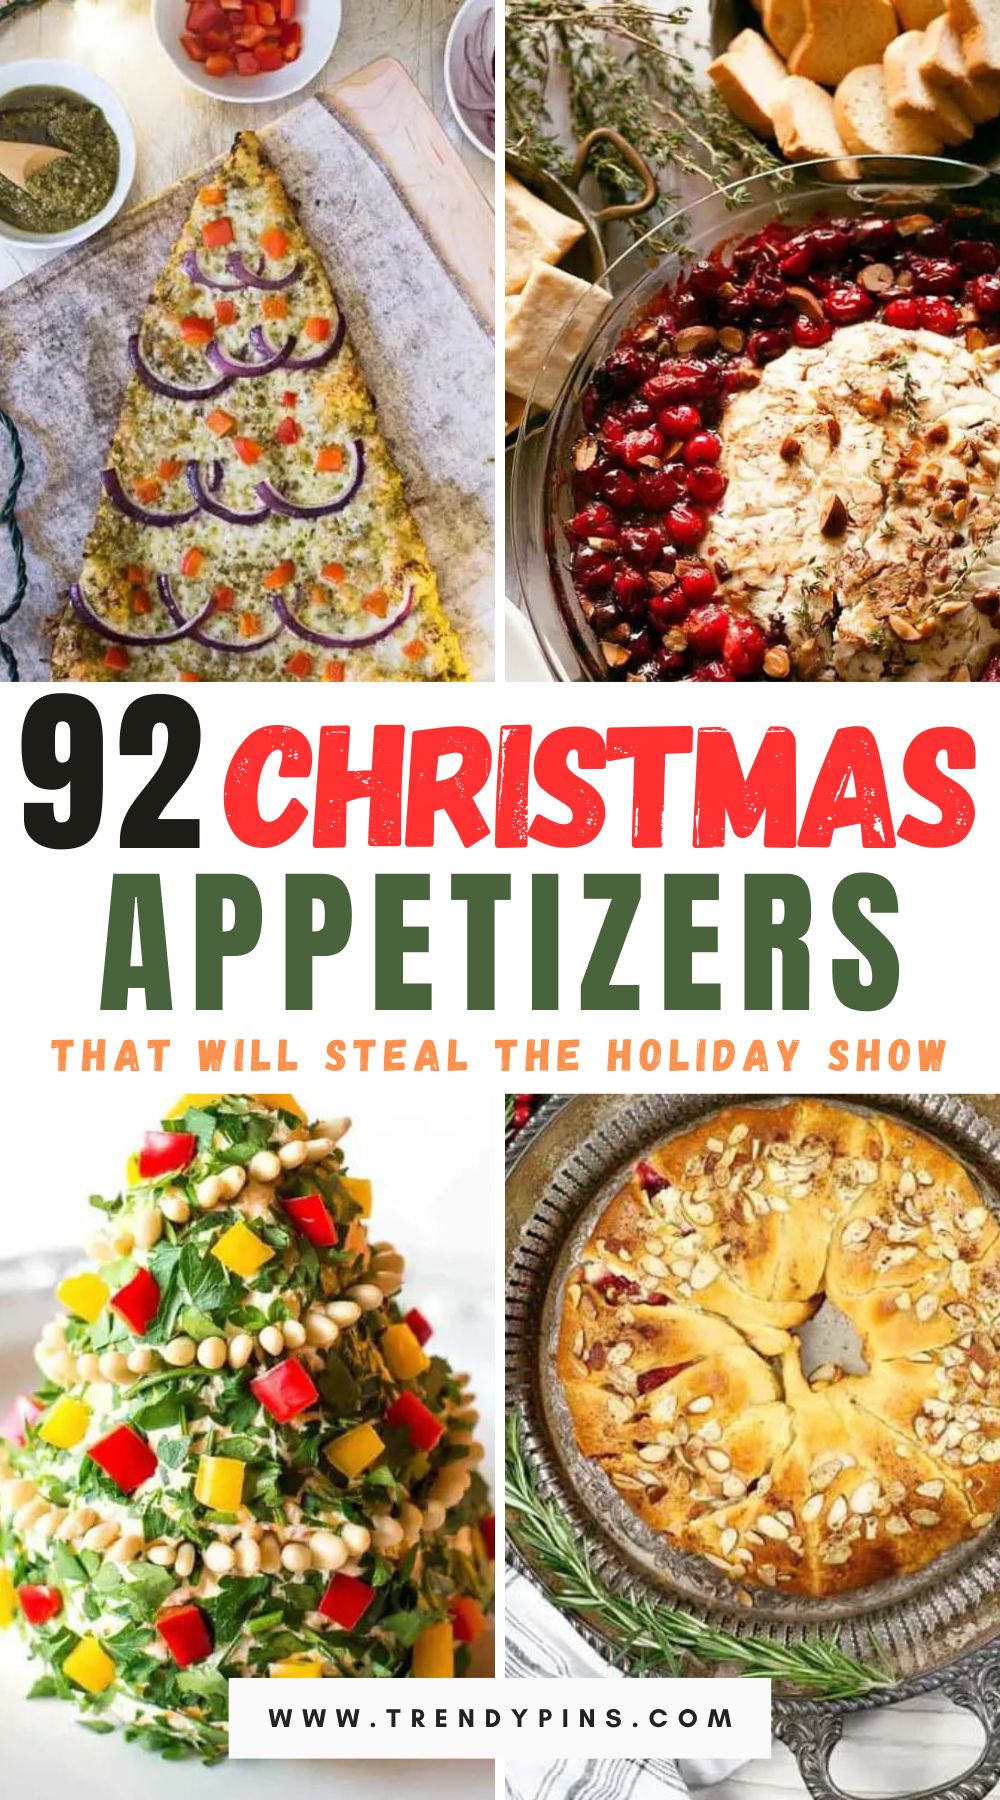 Unleash a symphony of flavors with our collection of 92 irresistible Christmas appetizers that are poised to steal the holiday show. Click to discover a culinary wonderland, where every bite transforms your festive gatherings into memorable feasts of joy and flavor!